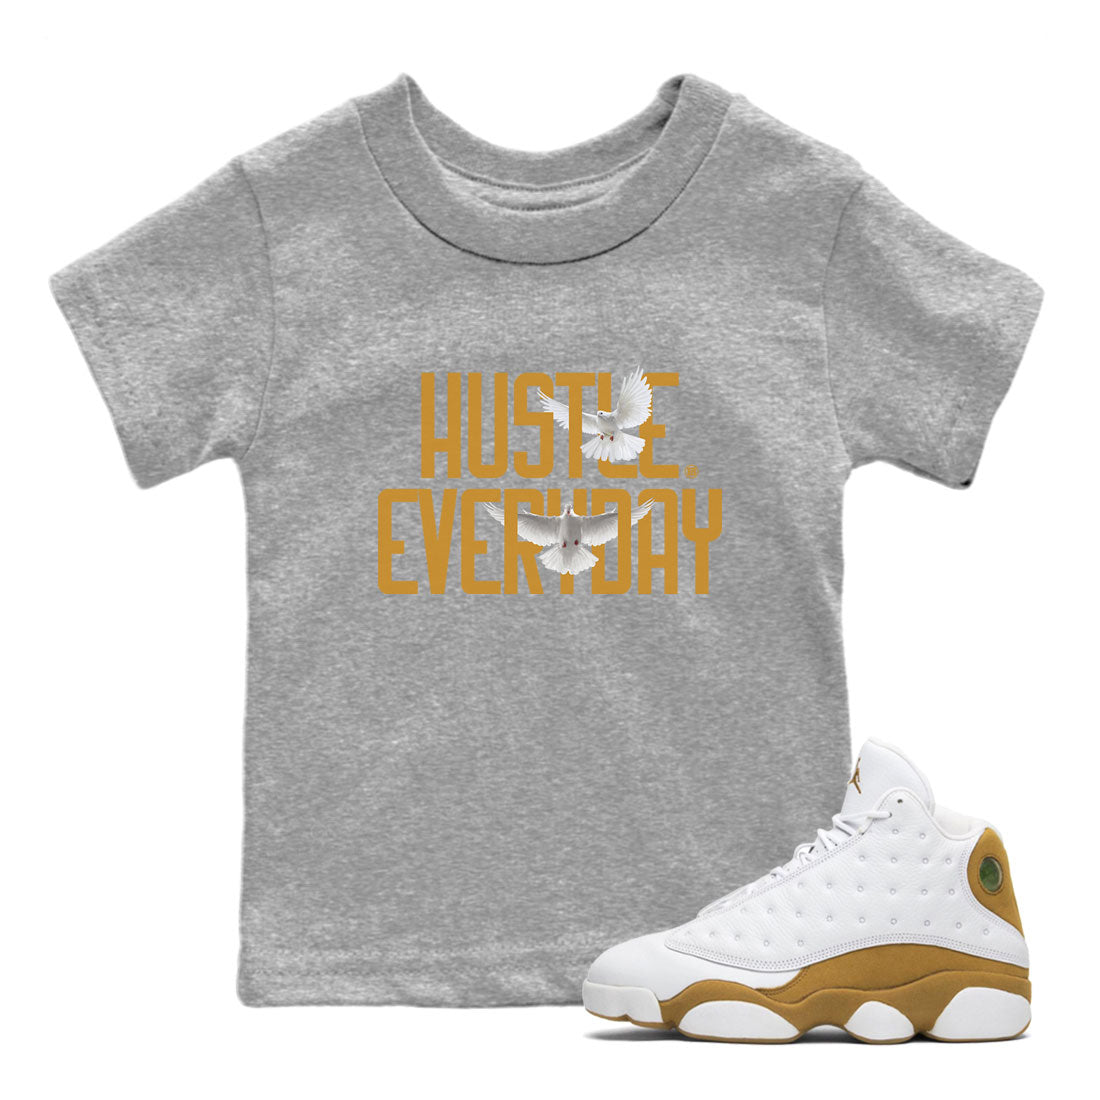 Air Jordan 13 Retro Wheat Sneaker Matching Clothes Daily Hustle Streetwear Sneaker Shirt Air Jordan 13 Wheat Drip Gear Zone Sneaker Matching Clothing Kids and Baby Youth Shirts Heather Grey 1